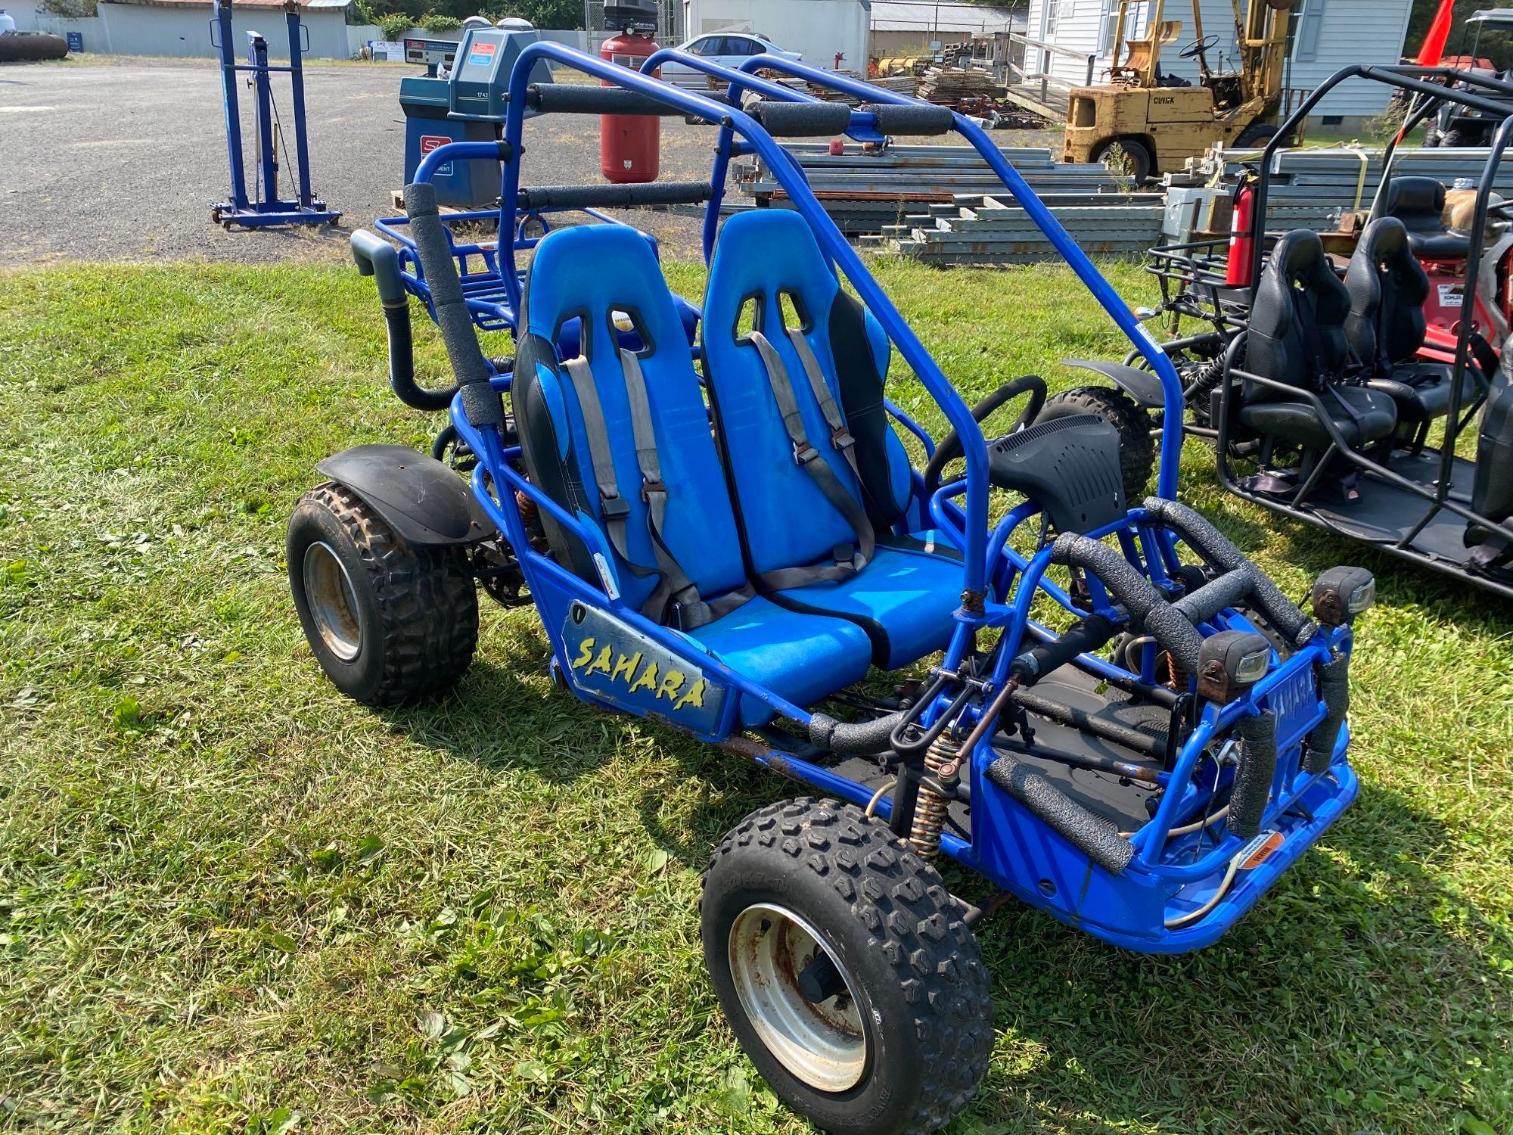 Image for 2 Seater Go Kart 150, per seller been sitting and does not run